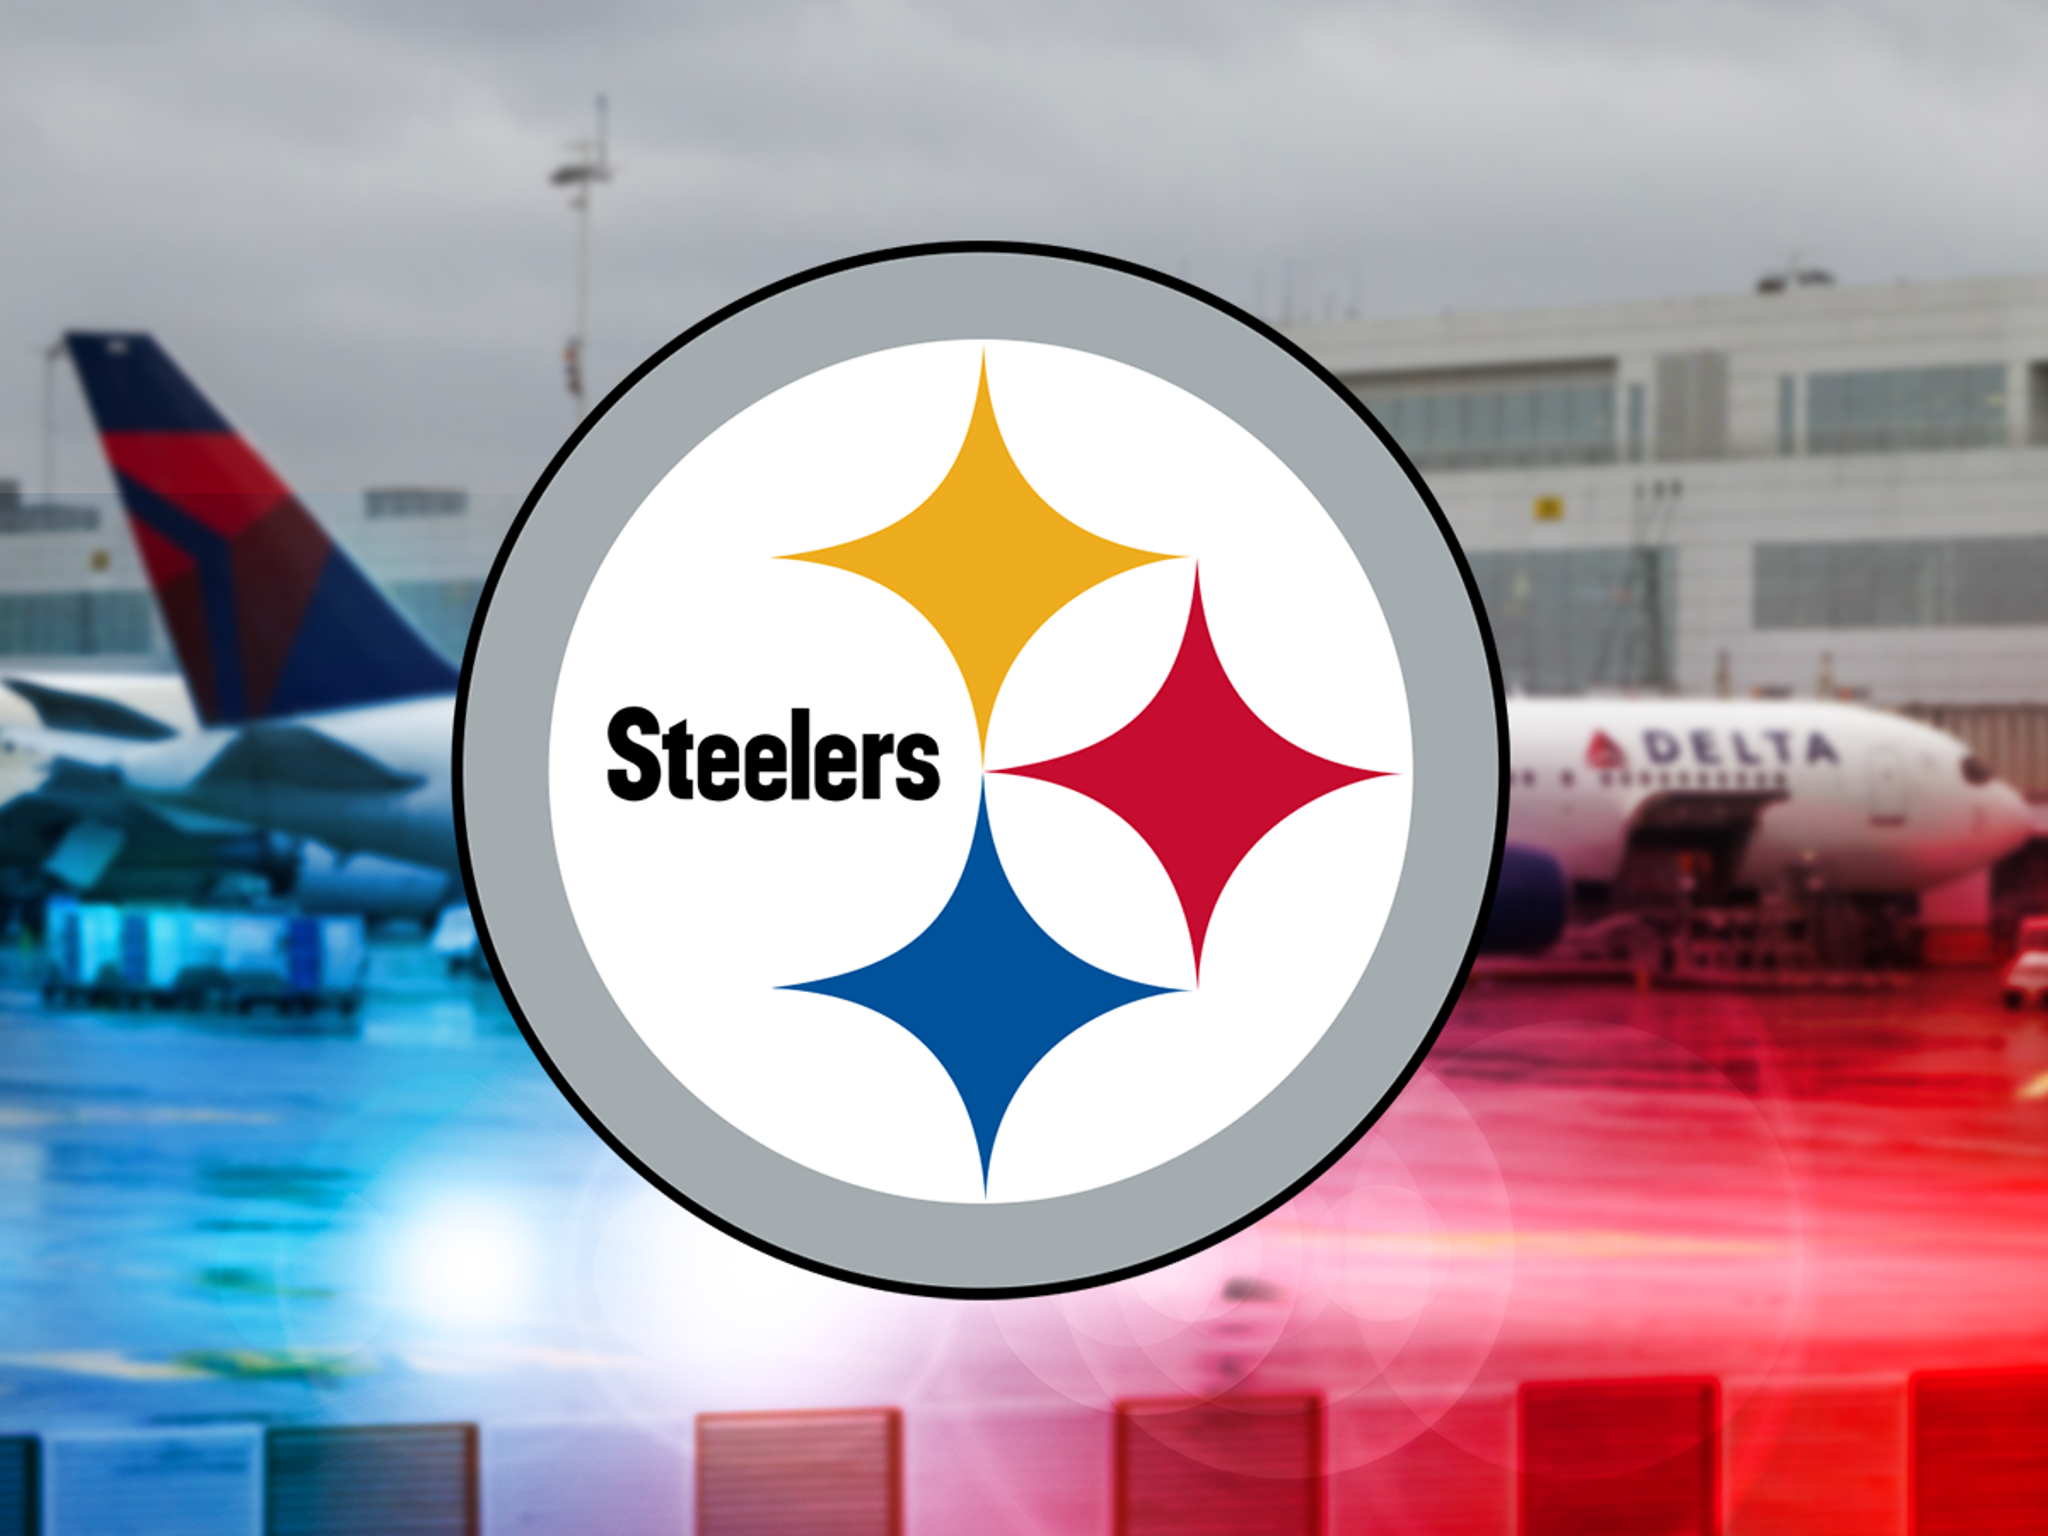 Everyone on the plane is safe': Pittsburgh Steelers charter plane